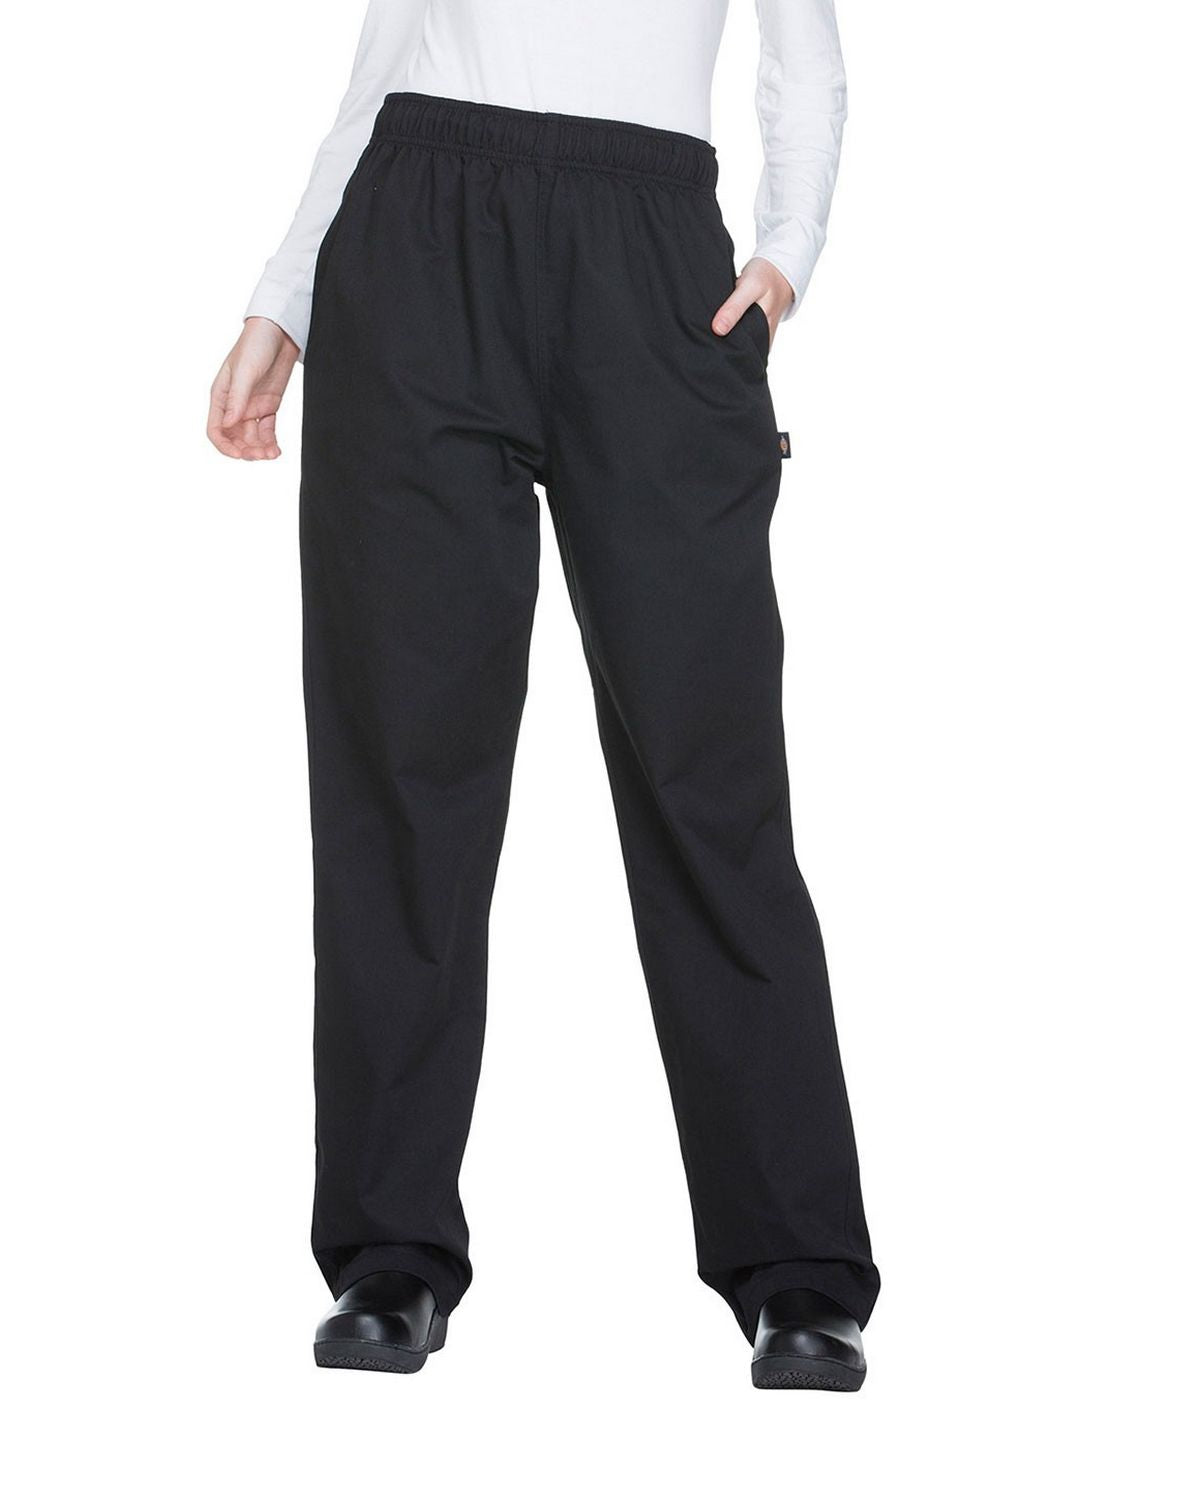 Pant Baggy Traditional Unisex 3 Pocket